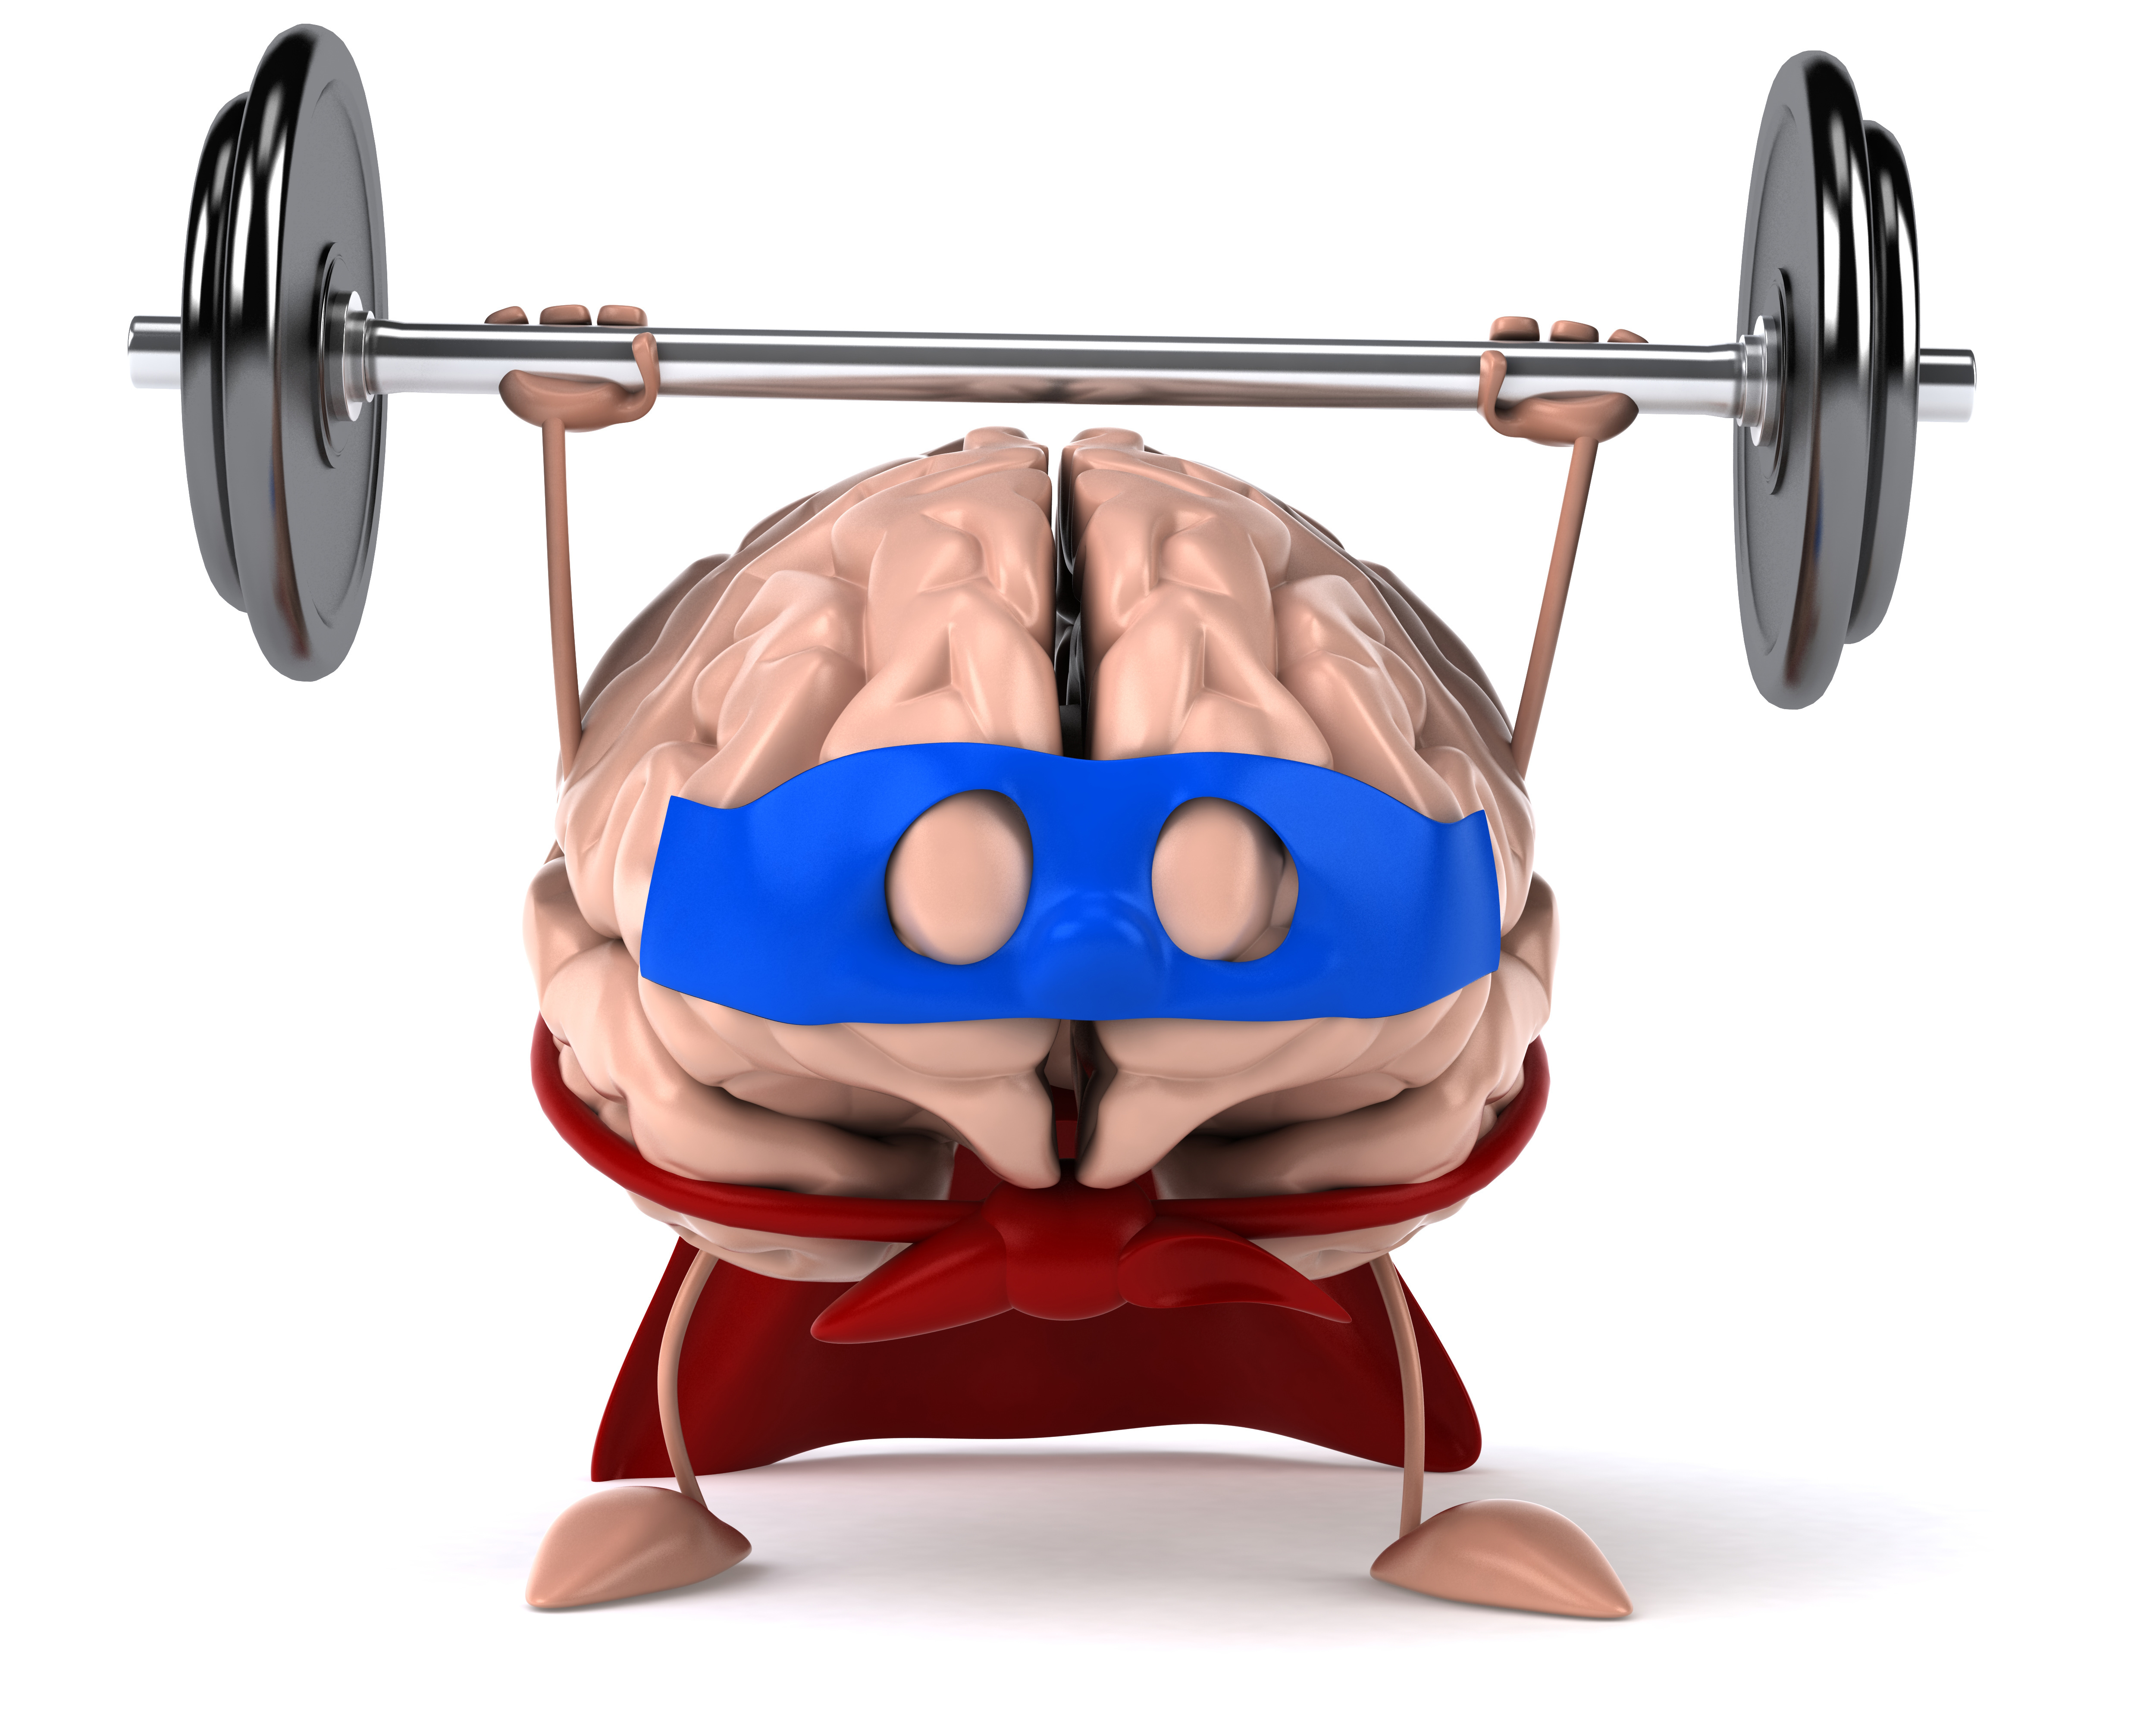 brain gym and more